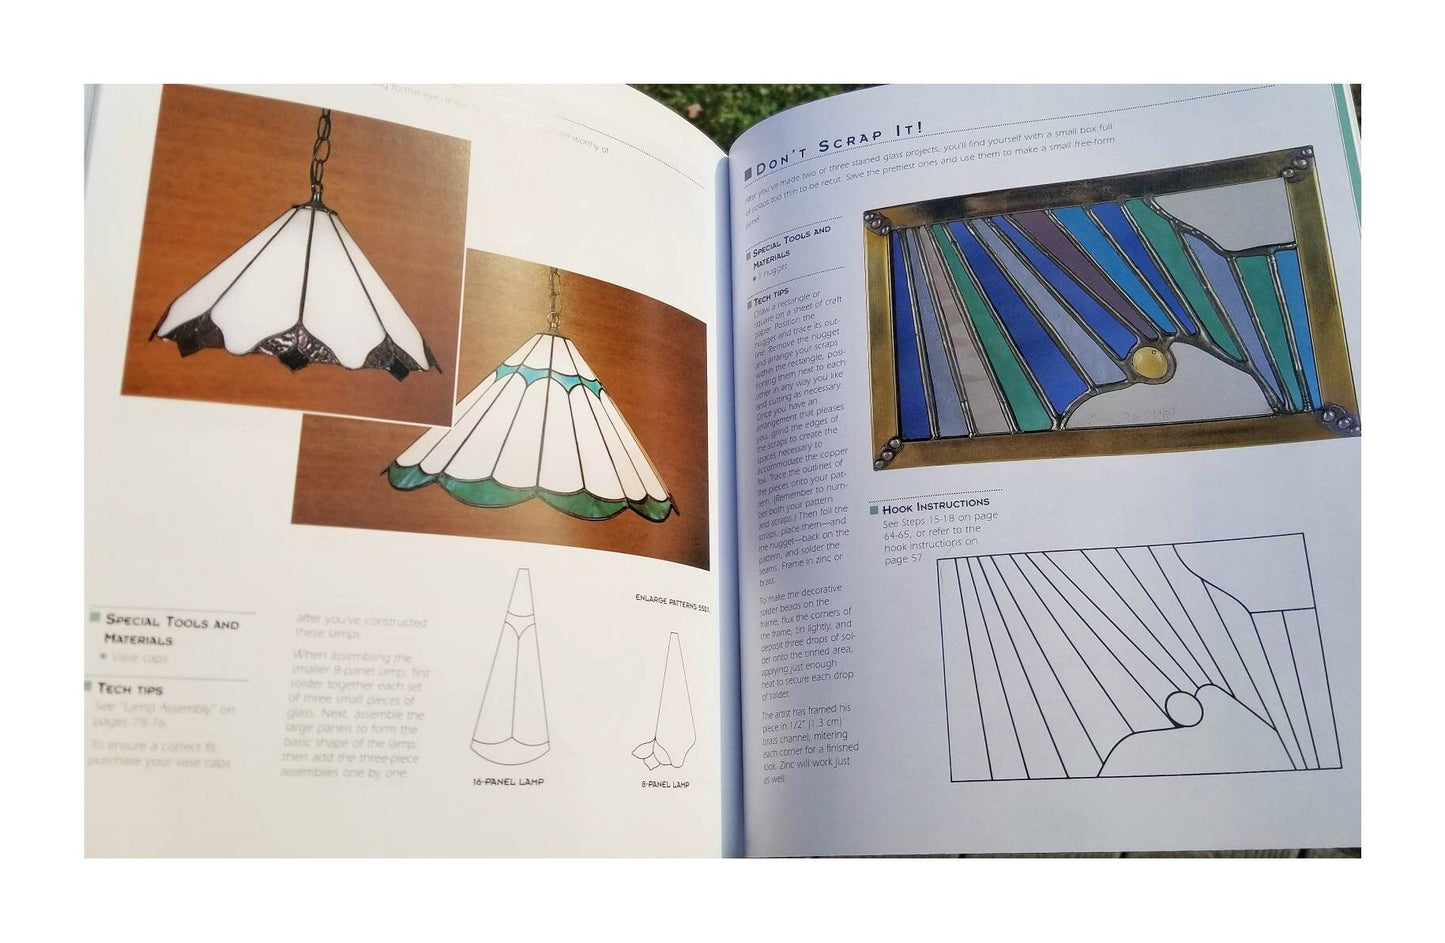 Stained Glass Basics Book, Patterns & Projects. Learn how to create copper foil, leaded glass. Comprehensive Instructions for many projects